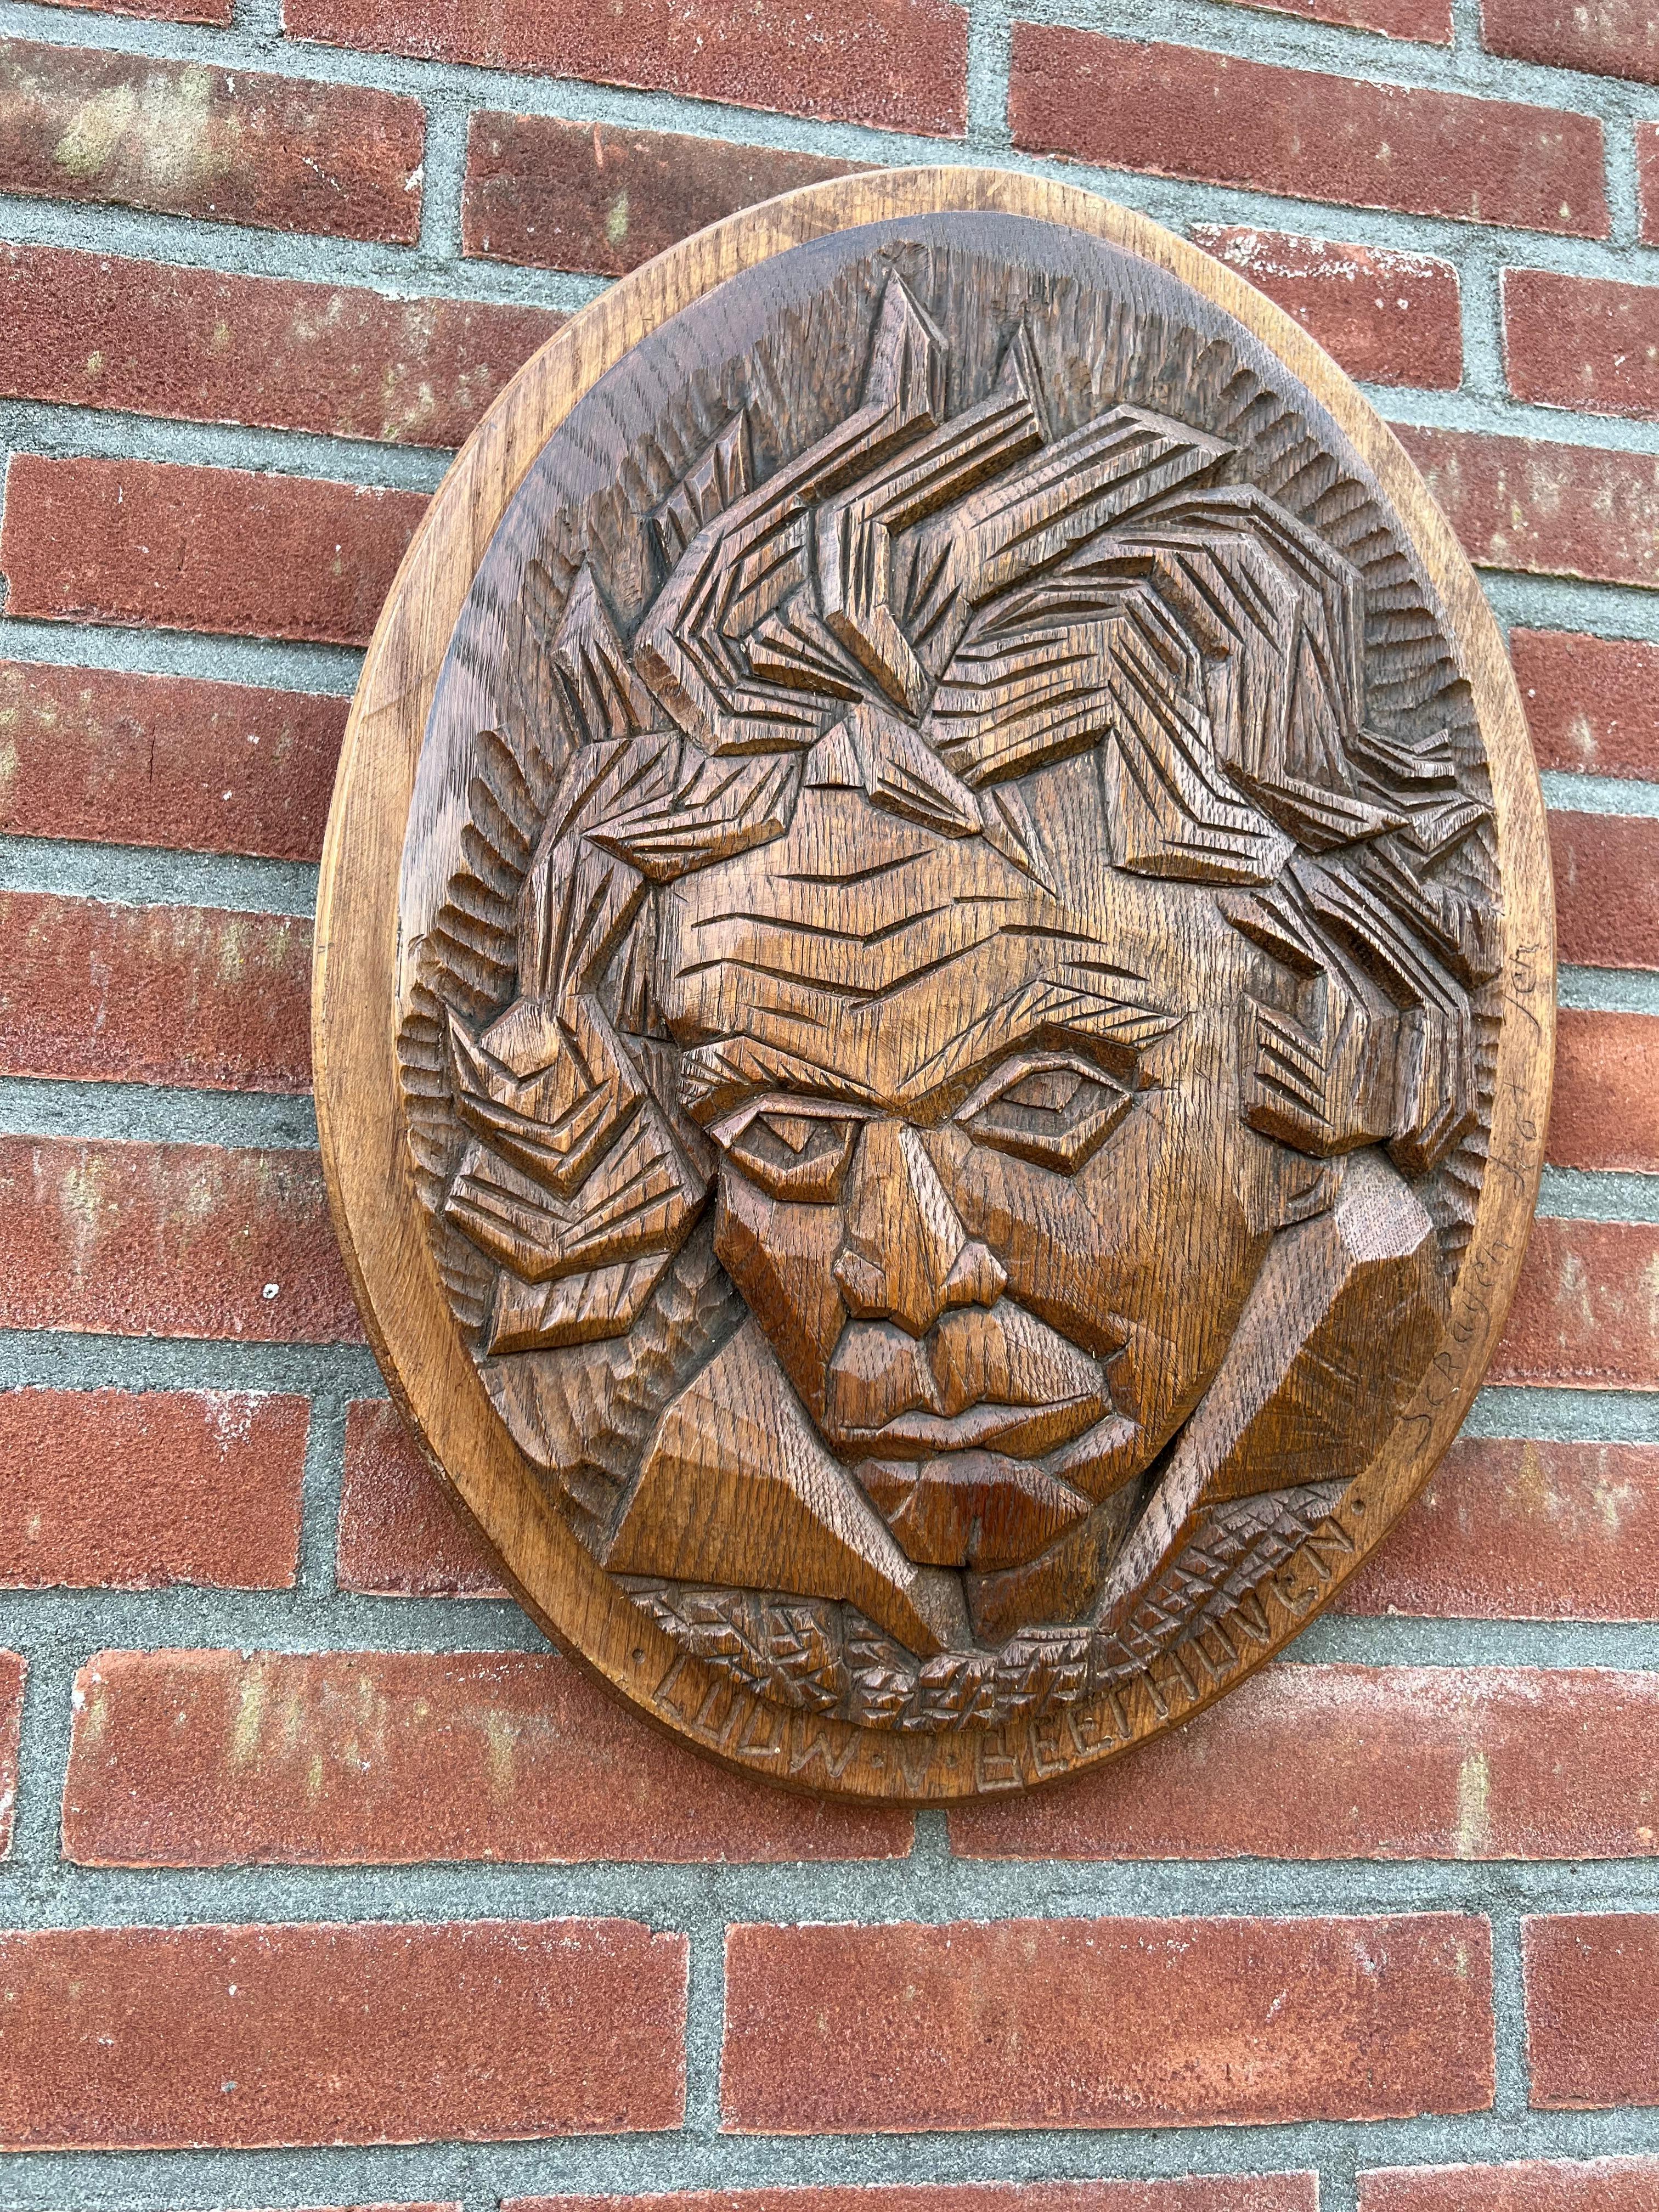 Antique and uniquely hand carved work of art, in deep relief.

Anyone who is capable of creating such a unique, geometric and expressive face of Ludwig van Beethoven out of an oakwooden plaque and of this size, in our view, is a true artist. The